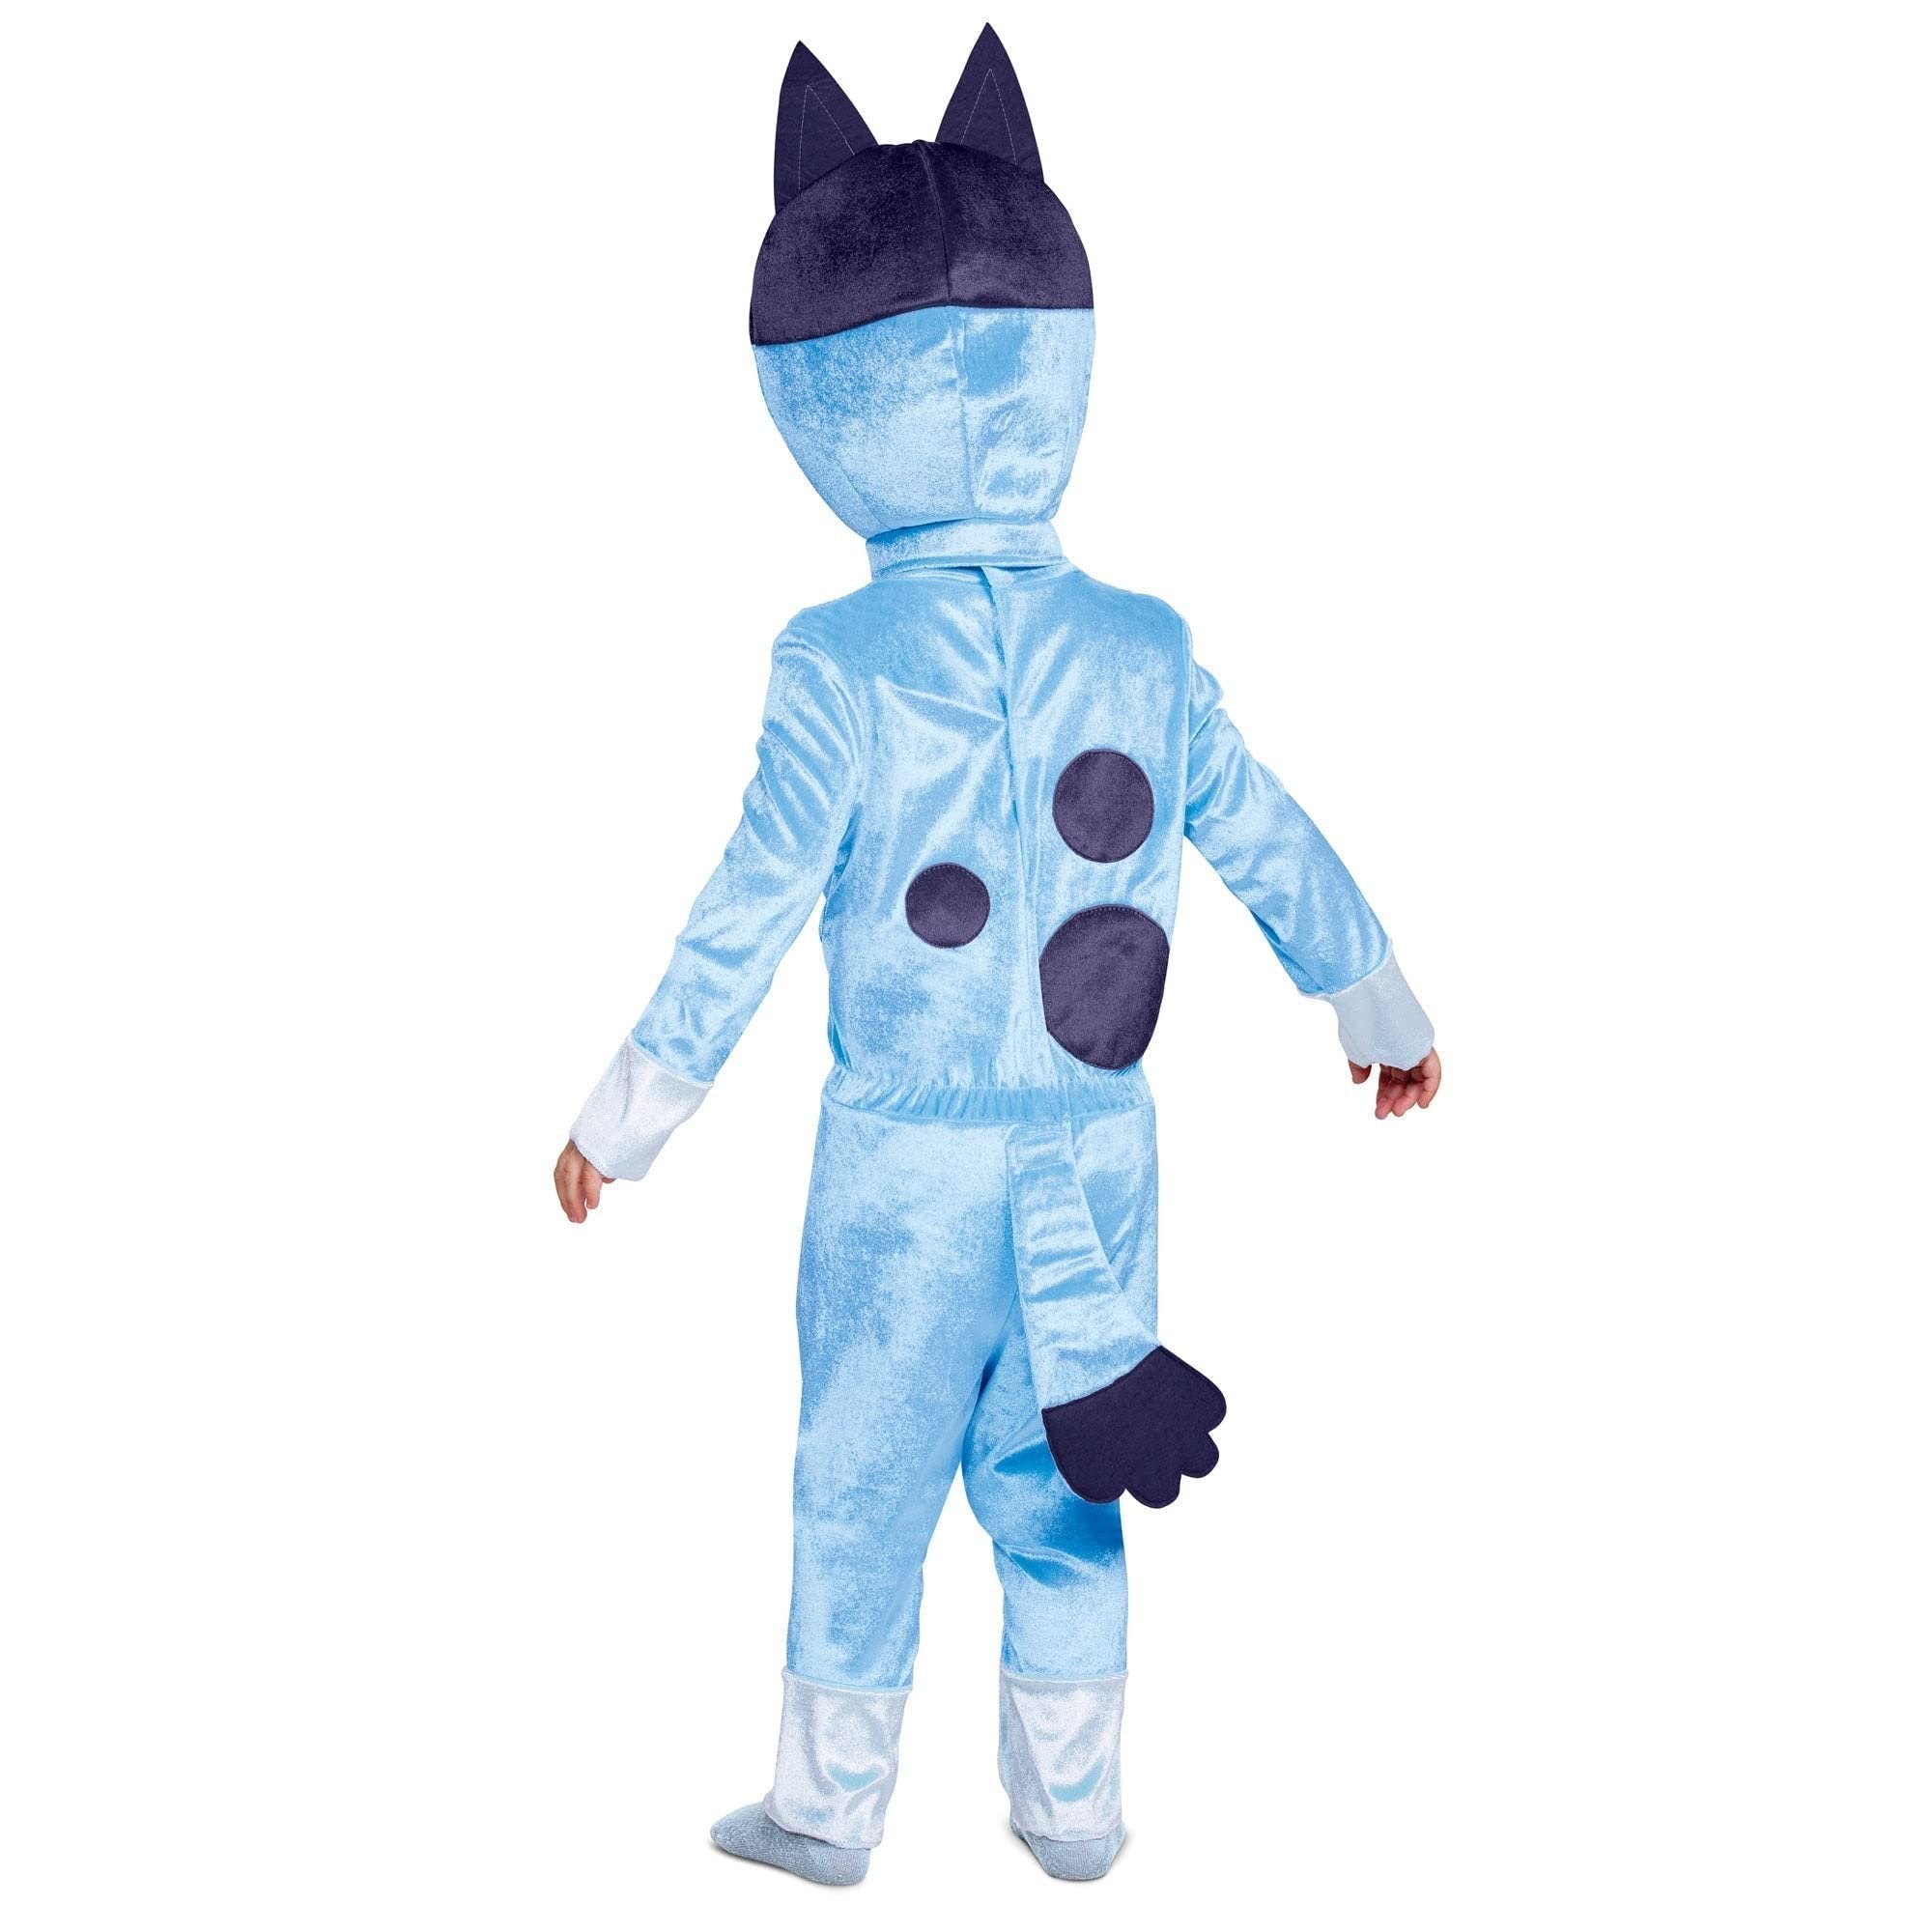 Disguise Bluey Costume for Kids, Official Bluey Character Outfit with Jumpsuit and Mask, Classic Toddler Size Large (4-6)